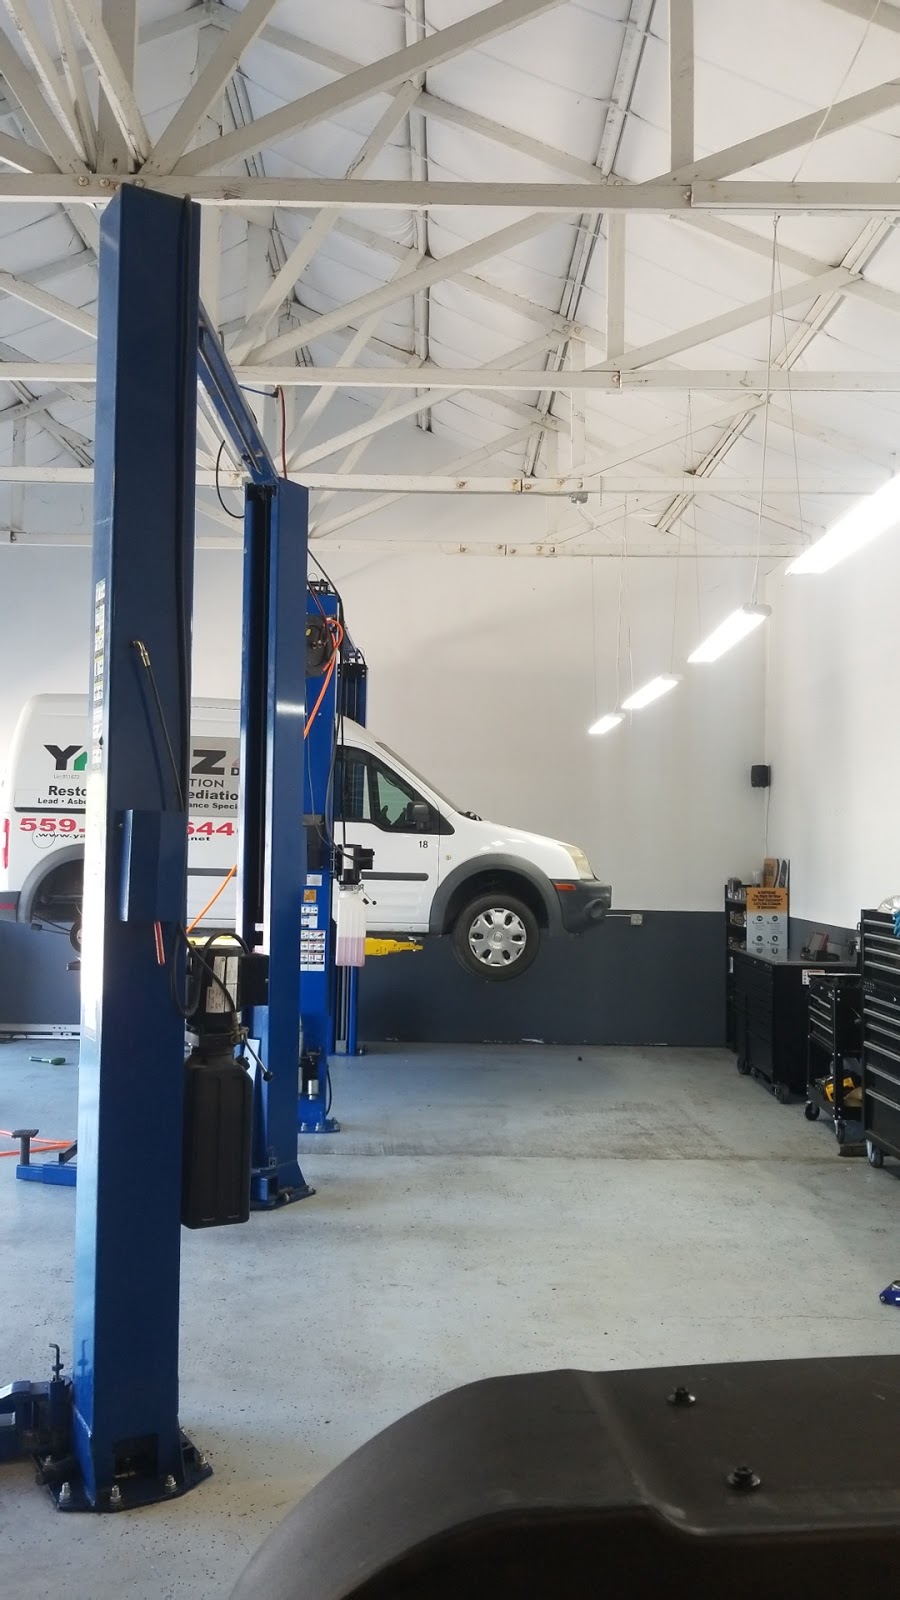 QUALITY AUTO REPAIR | Phone Number please, 1300 I St, Reedley, CA 93654, USA | Phone: (559) 743-7467